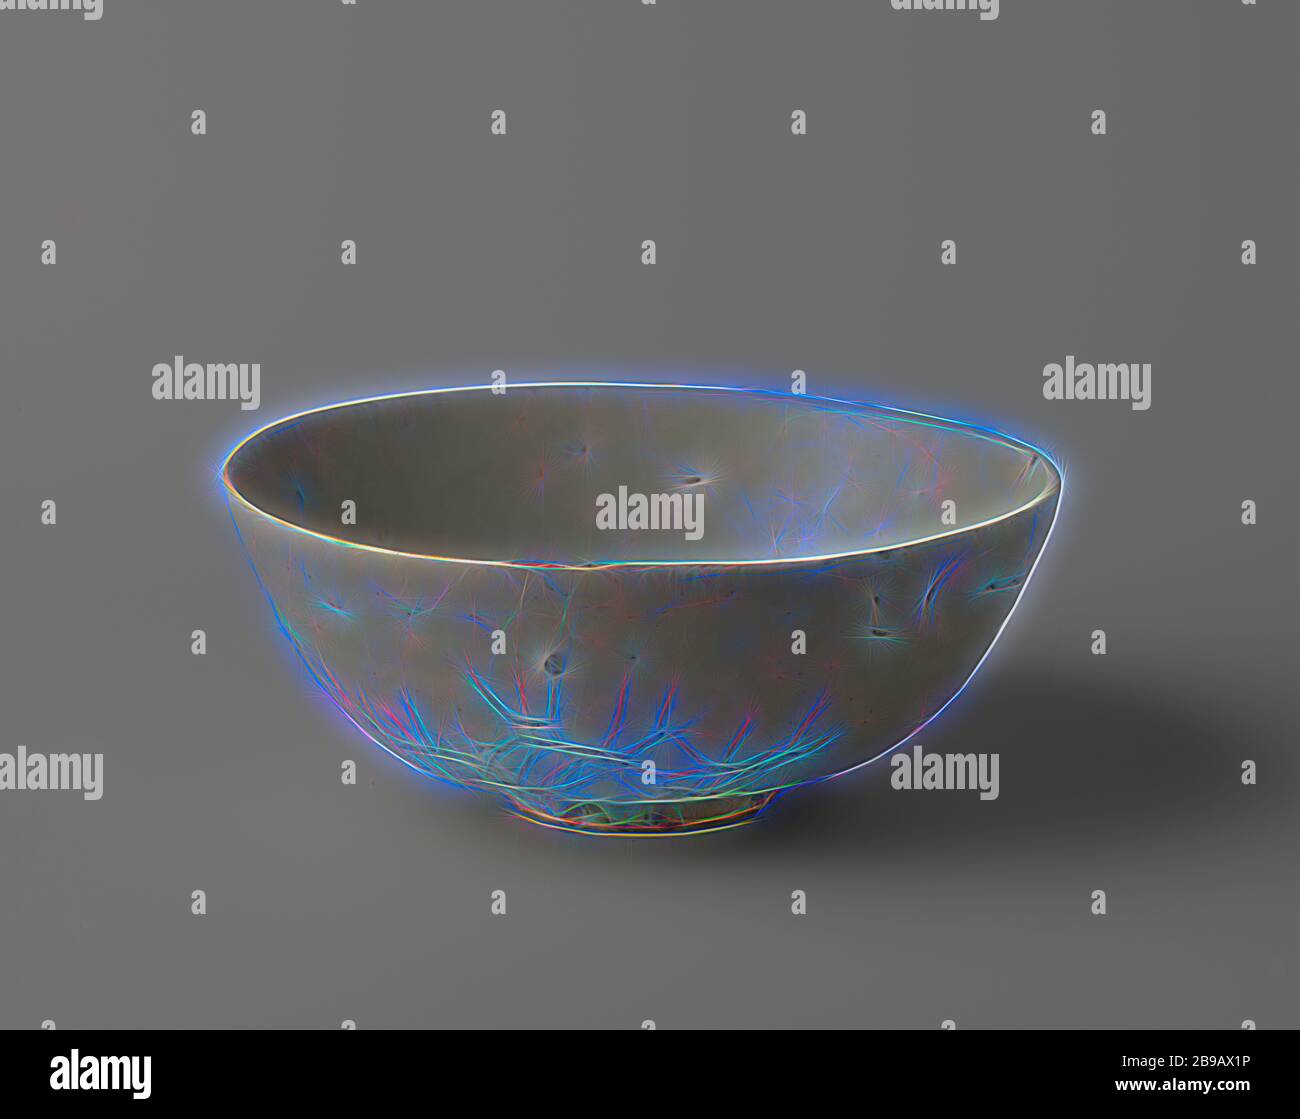 Bowl From V O C Ship Witte Leeuw Swatow Before 1613 Wanli Period 1573 1619 Porcelain H 8 5 Cm D 23 Cm D 6 6 Cm Reimagined By Gibon Design Of Warm Cheerful Glowing Of Brightness